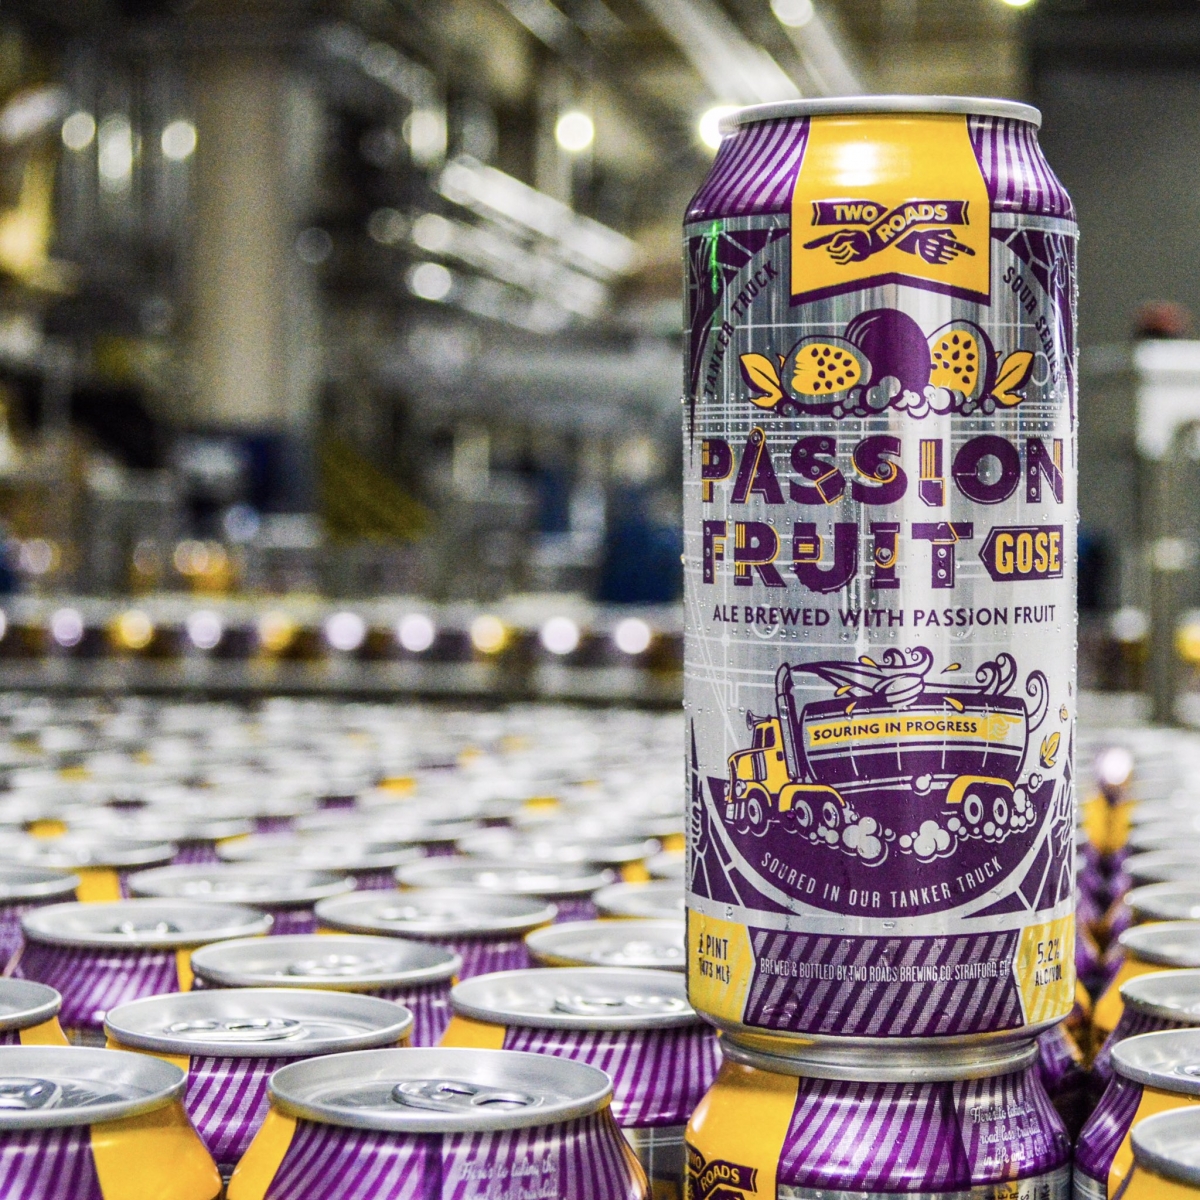 Tanker Truck Sour Series: Passion Fruit Gose by Two Roads Brewing Co.